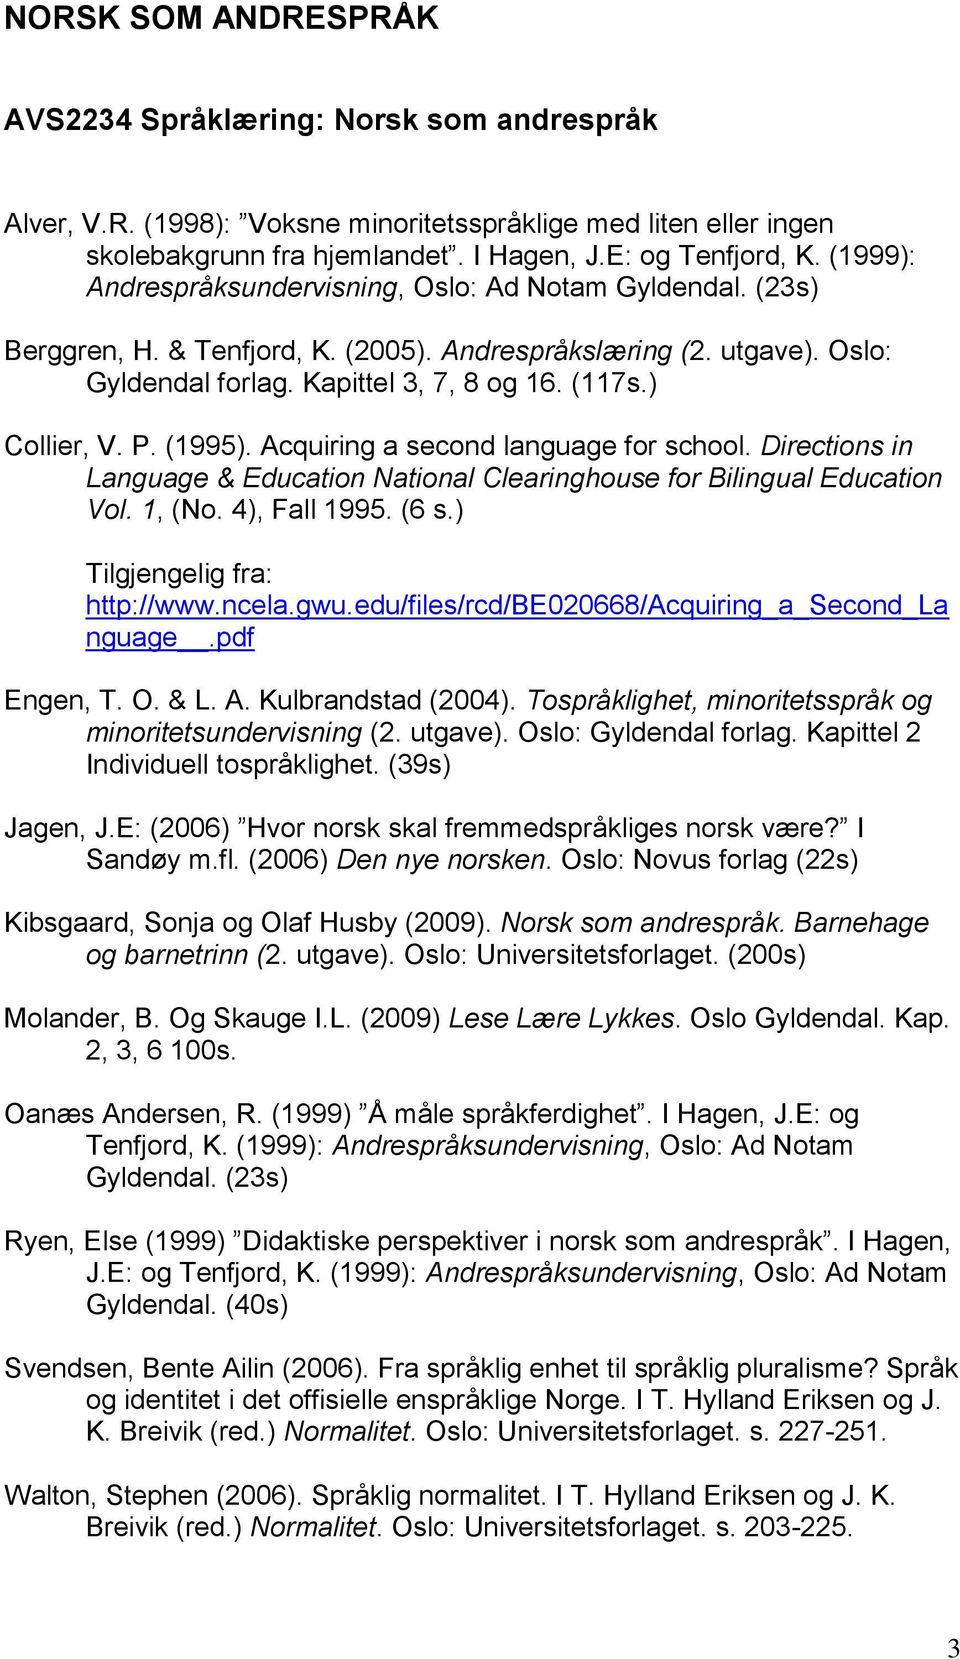 P. (1995). Acquiring a second language for school. Directions in Language & Education National Clearinghouse for Bilingual Education Vol. 1, (No. 4), Fall 1995. (6 s.) Tilgjengelig fra: http://www.